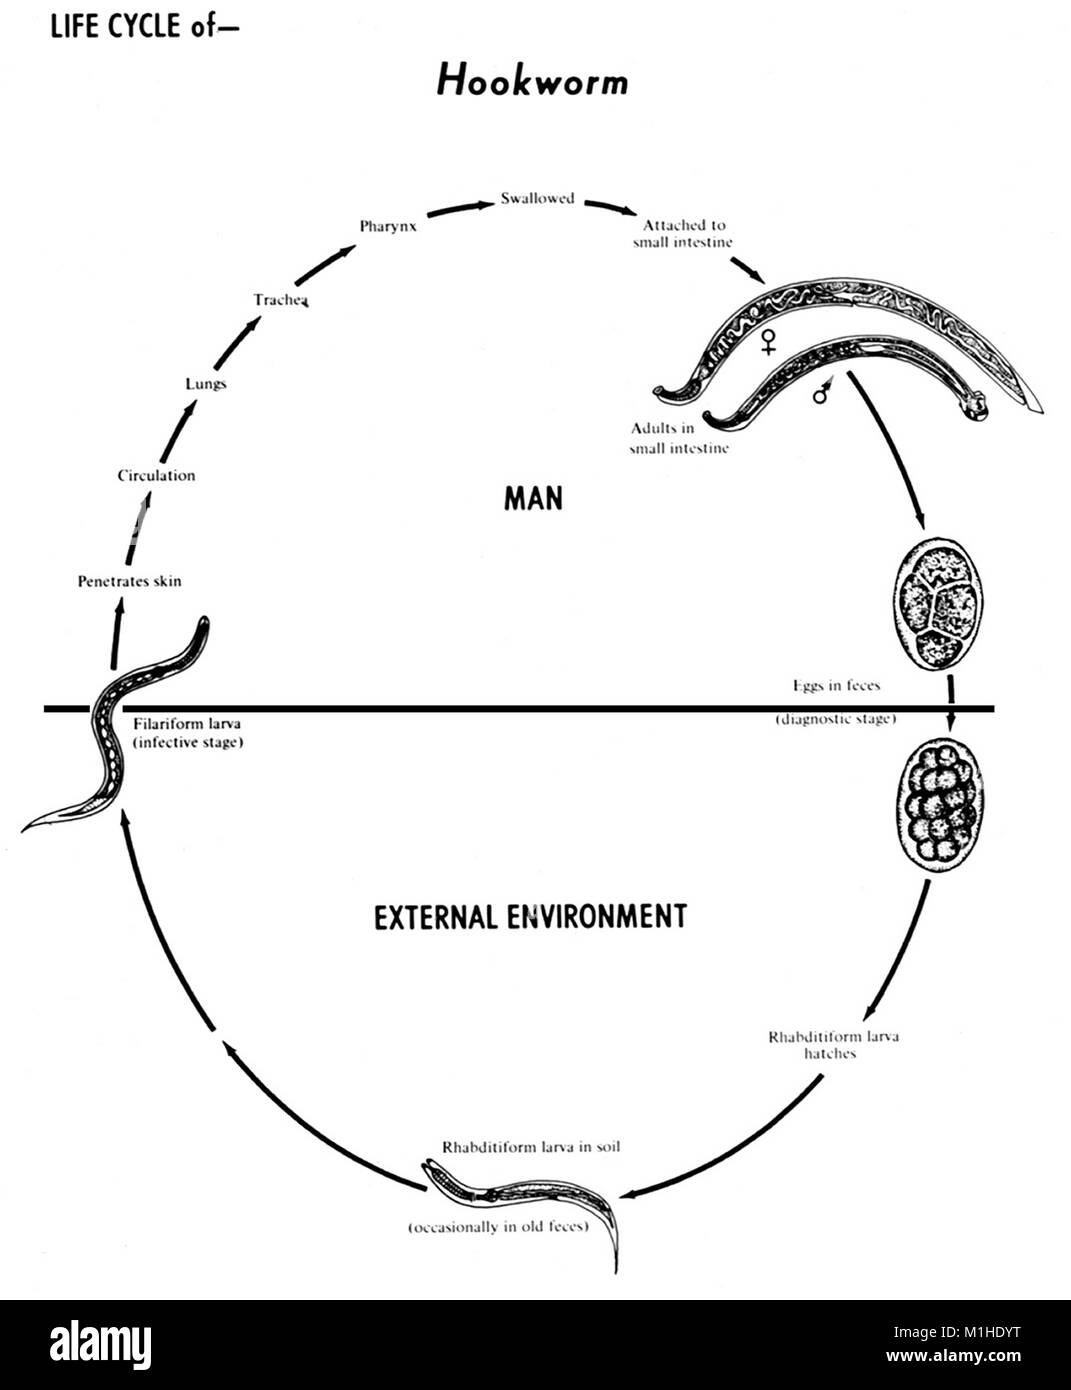 Human hookworms, Ancylostoma duodenale and Necator americanus, various stages in the life cycle, illustrated, 1982. Image courtesy Centers for Disease Control (CDC). () Stock Photo